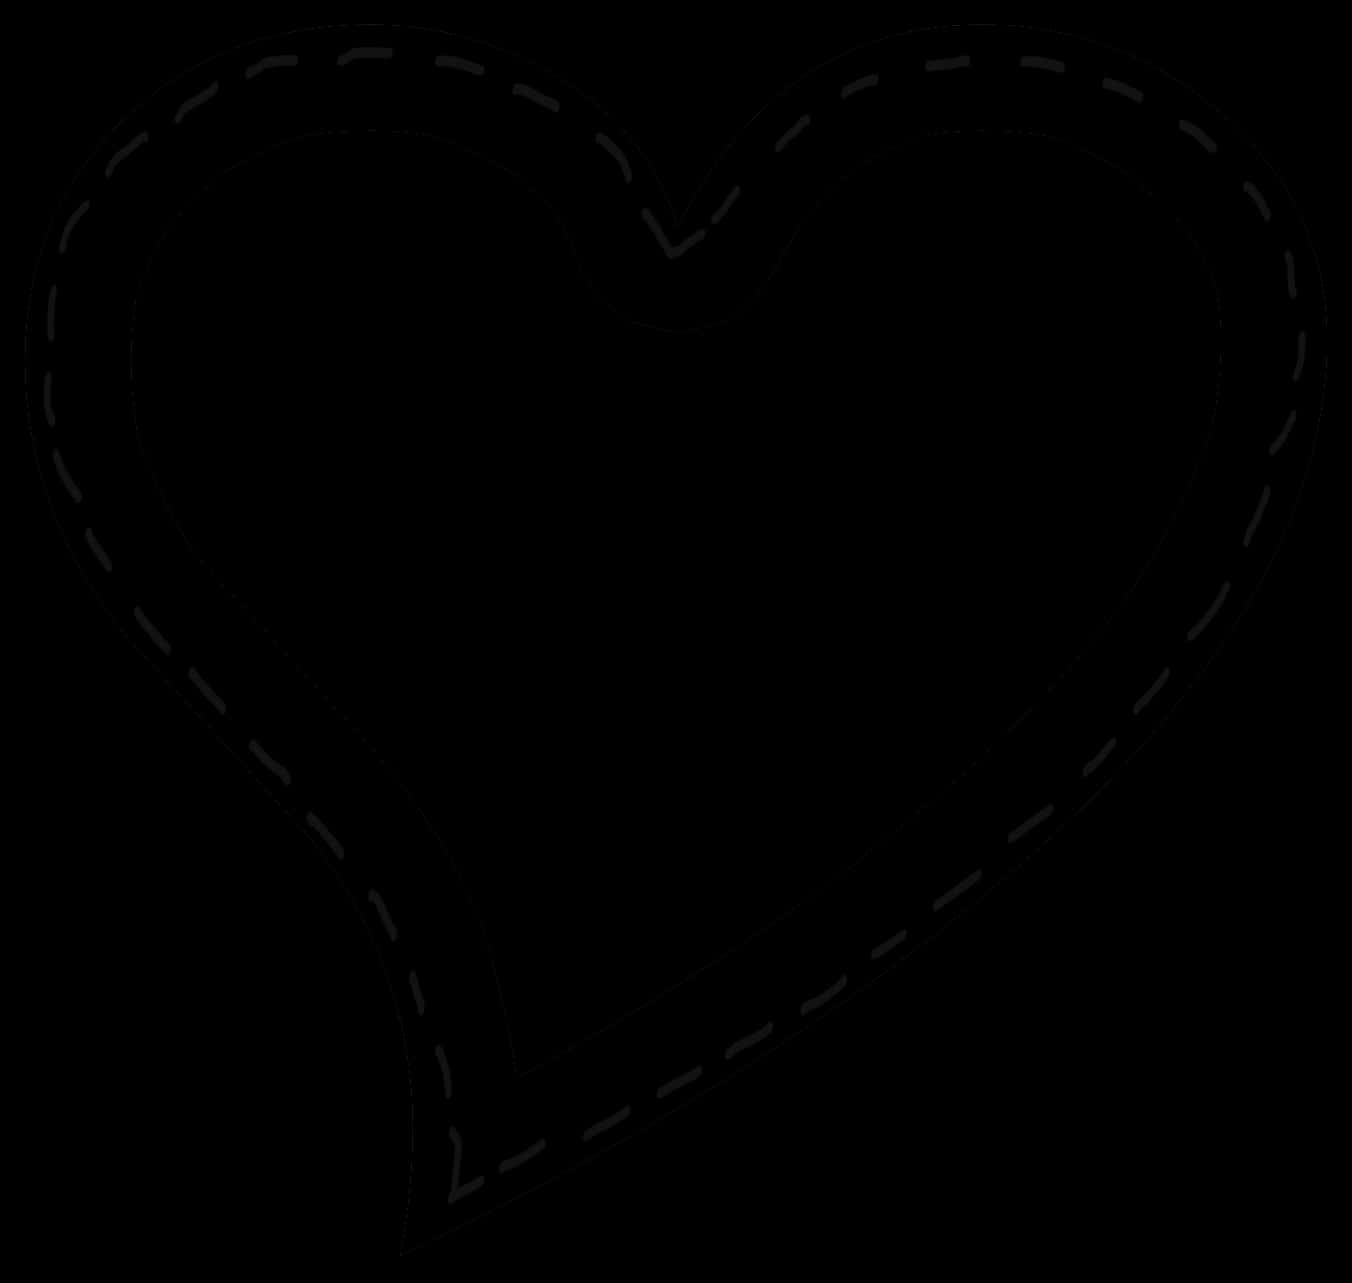 A Heart Shape With Dotted Lines